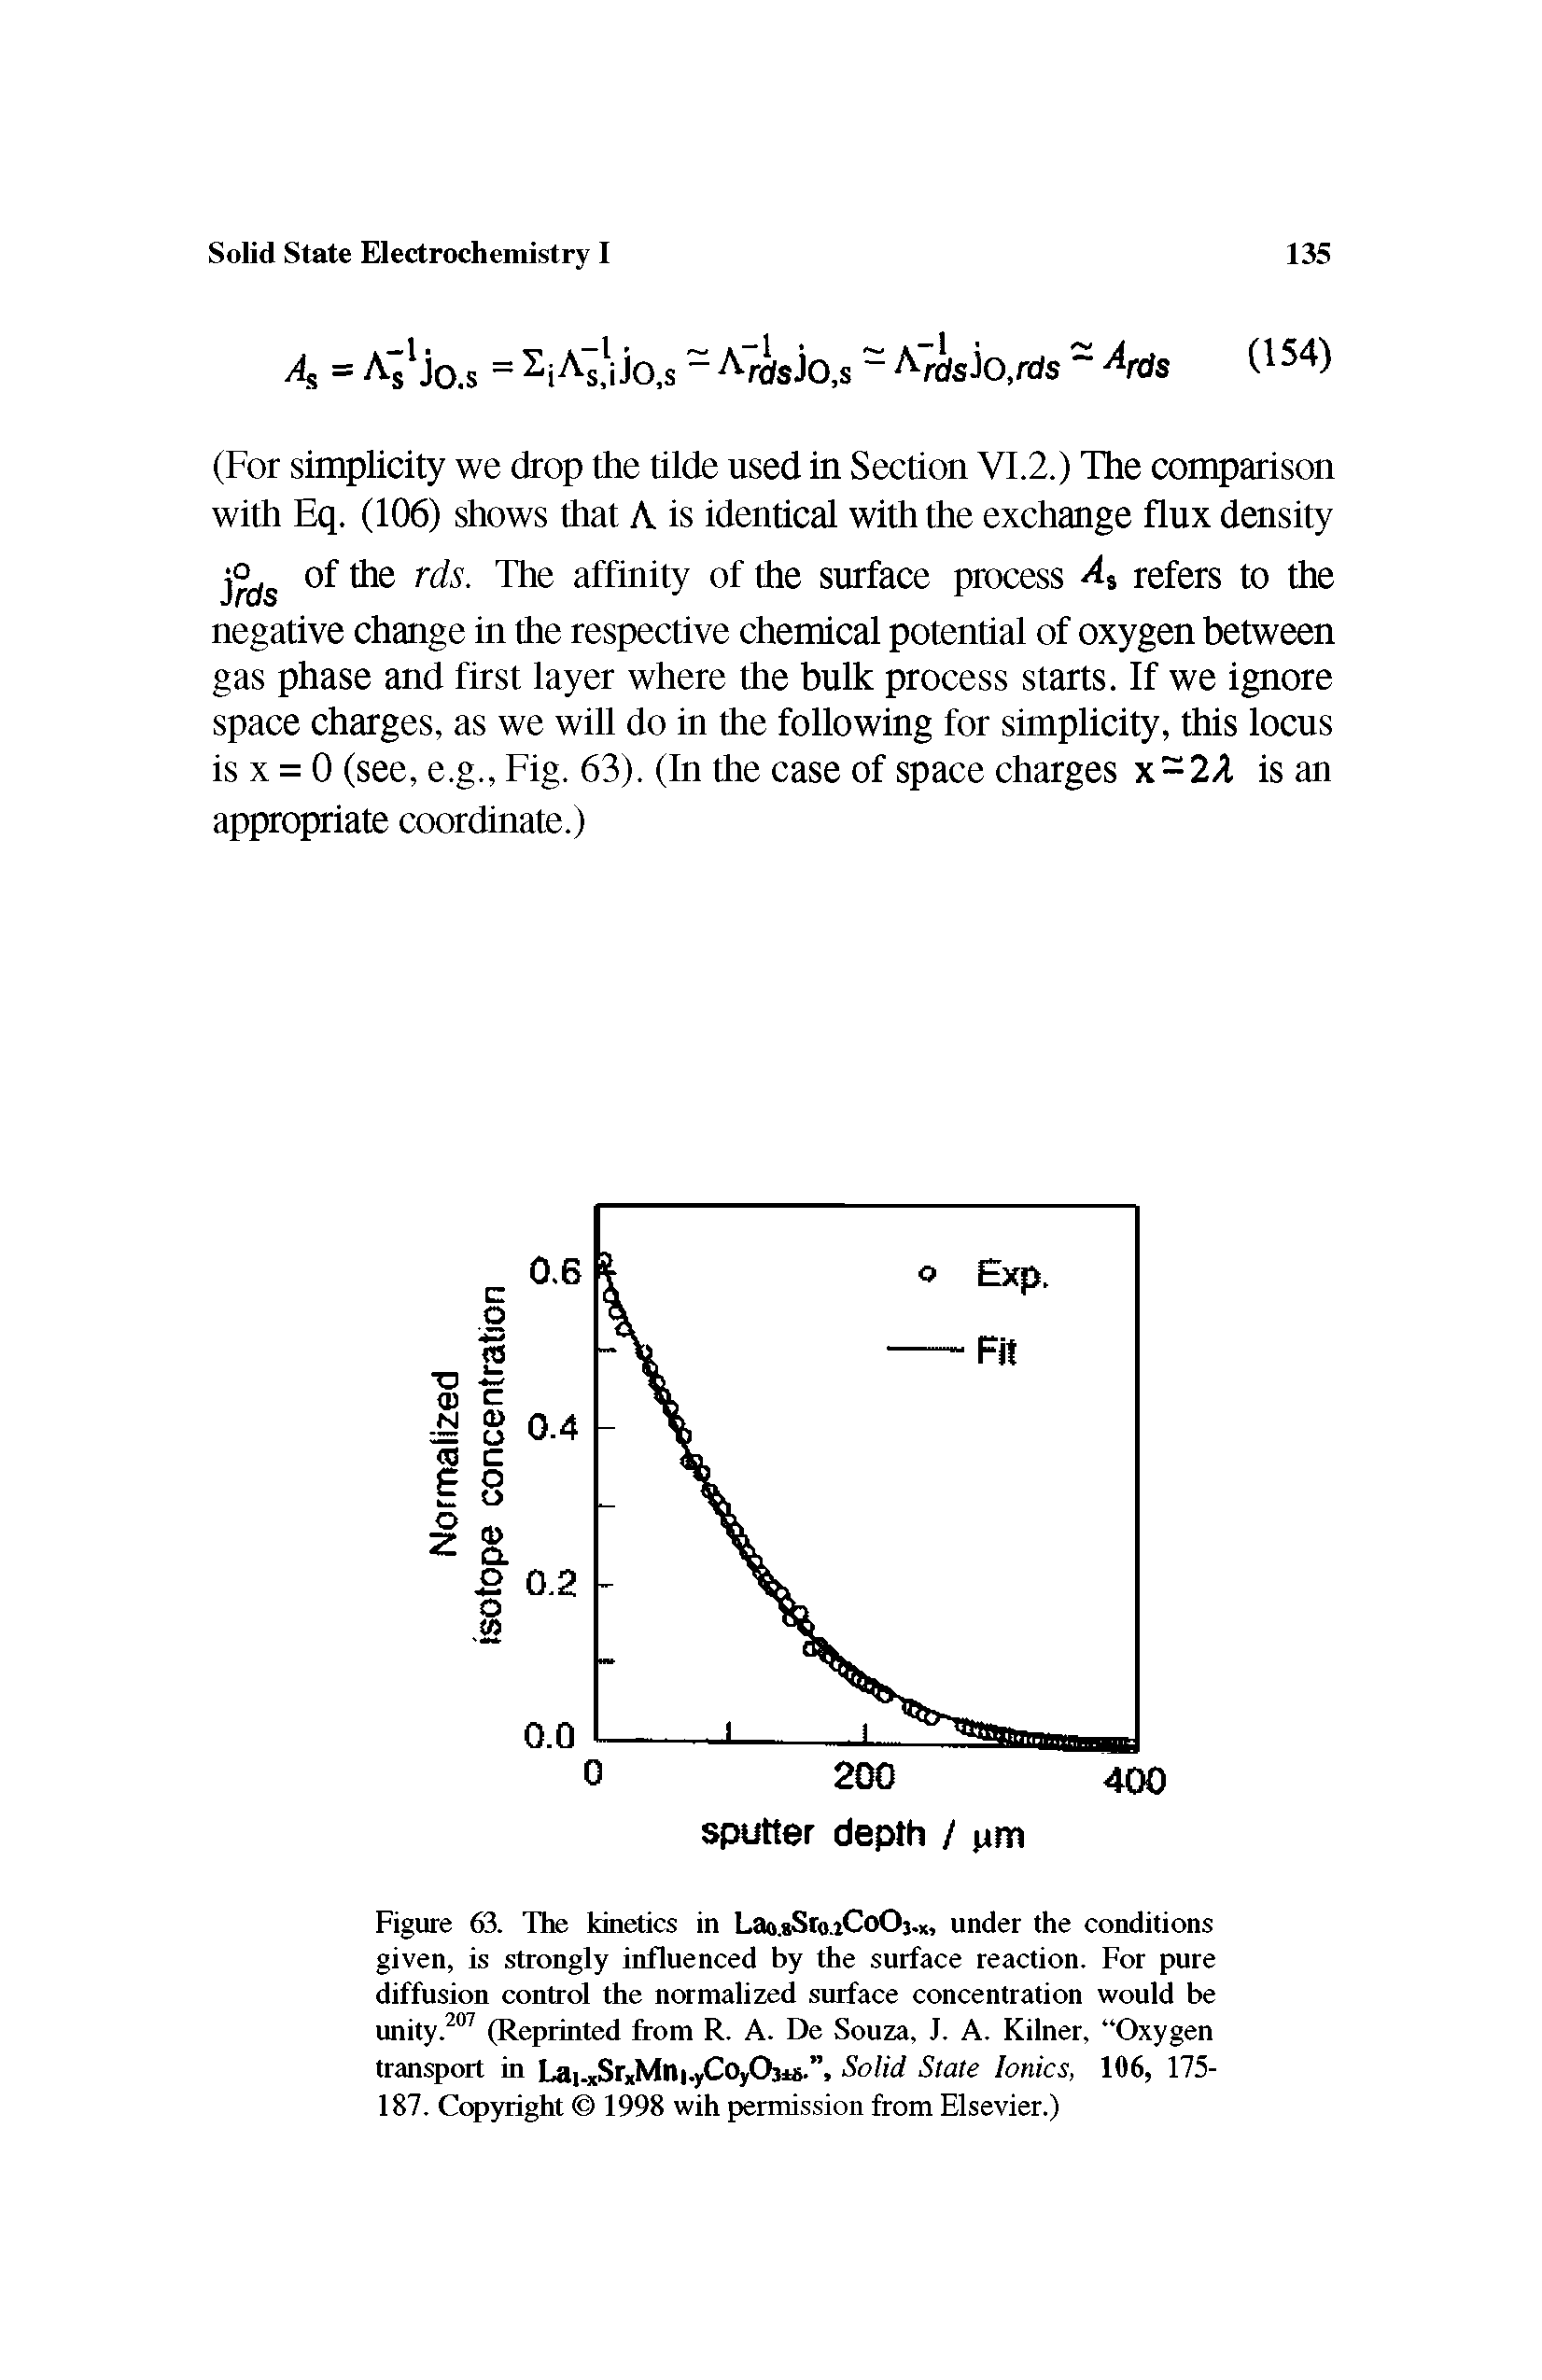 Figure 63. The kinetics in Lao. Sro.iCoOj.x> under the conditions given, is strongly influenced by the surface reaction. For pure diffusion control the normalized surface concentration would be unity.207 (Reprinted from R. A. De Souza, J. A. Kilner, Oxygen transport in La,.xSrxMni.yCoy03is. , Solid State Ionics, 106, 175-187. Copyright 1998 wih permission from Elsevier.)...